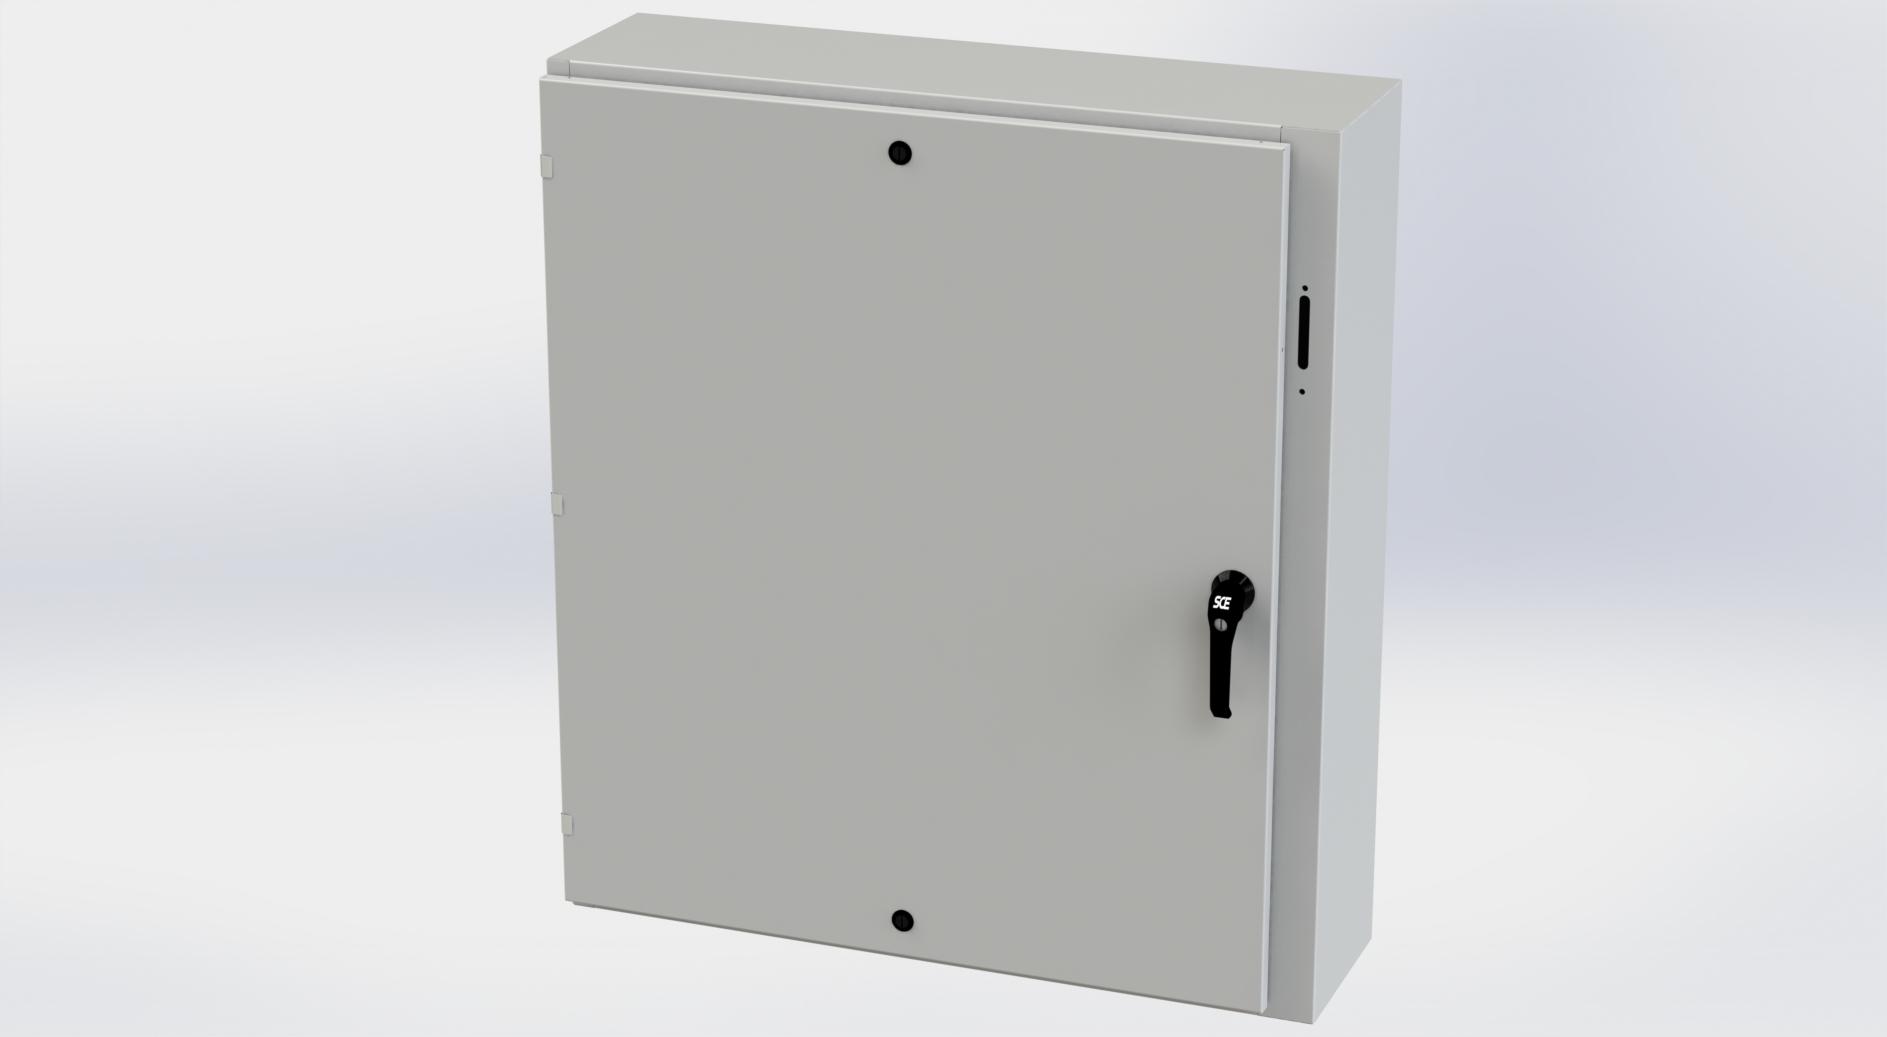 Saginaw Control SCE-42XEL3710LPLG XEL LP Enclosure, Height:42.00", Width:37.38", Depth:10.00", RAL 7035 gray powder coating inside and out. Optional sub-panels are powder coated white.